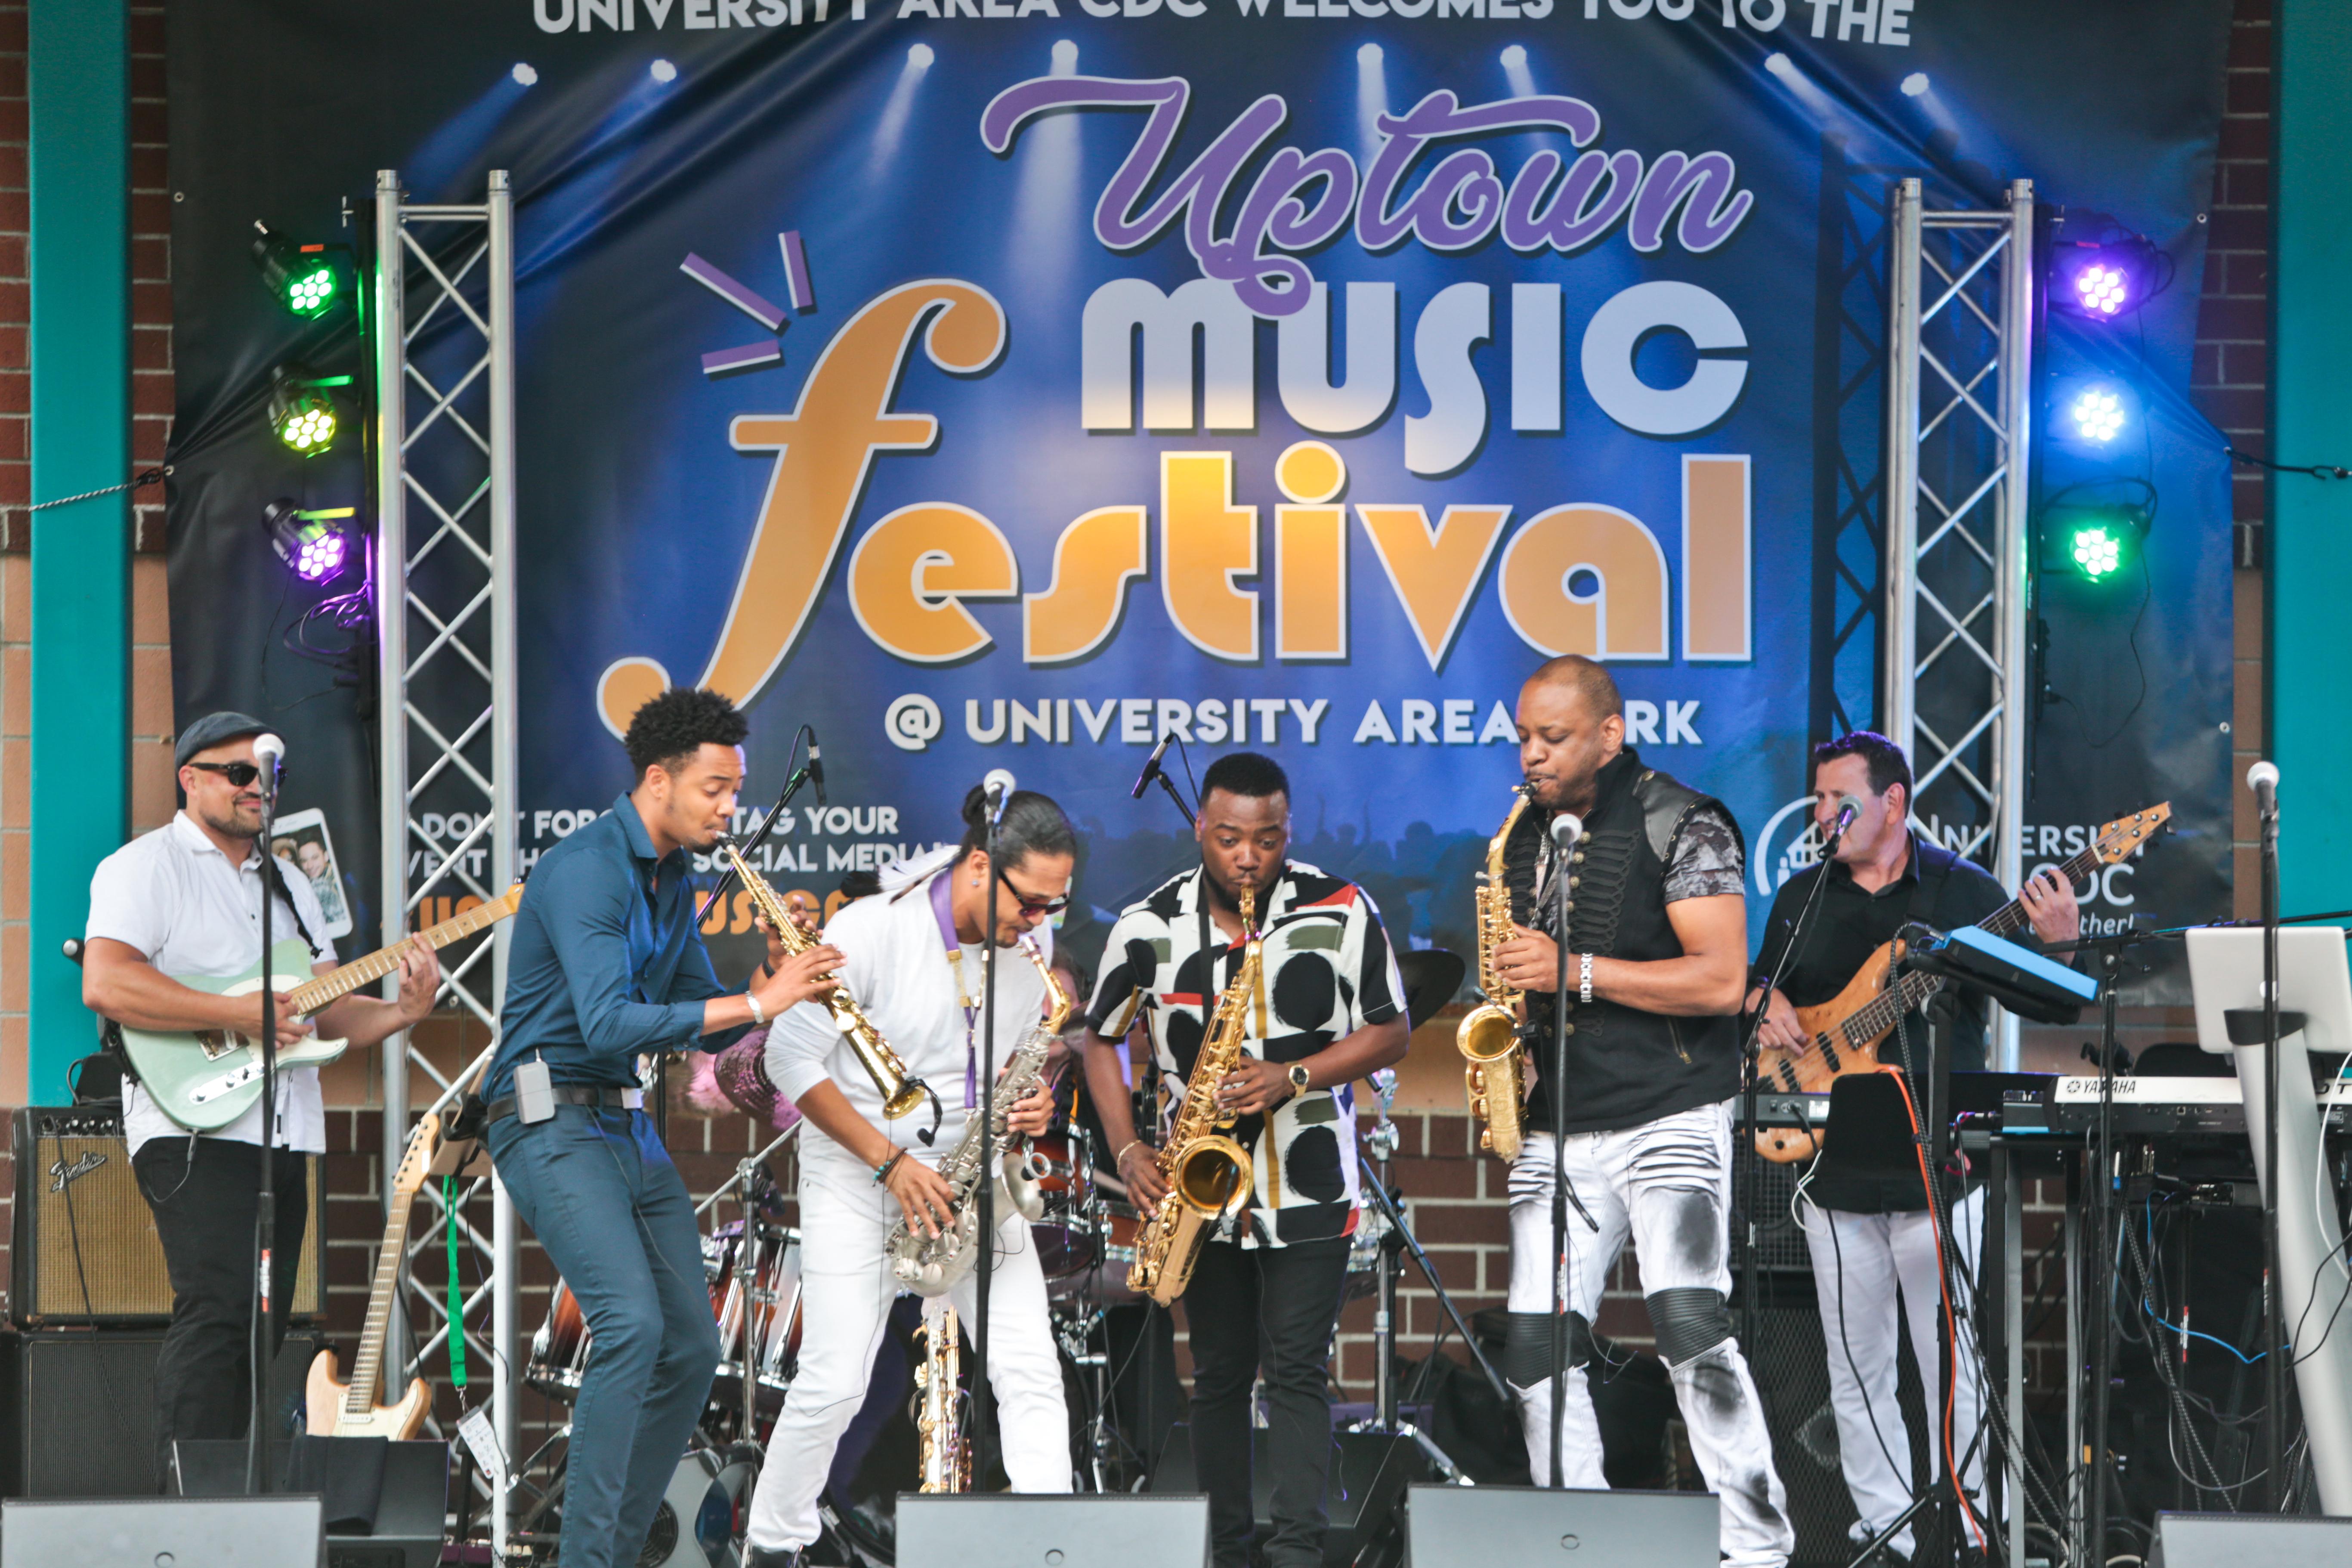 2020 Uptown Music Festival benefiting University Area CDC